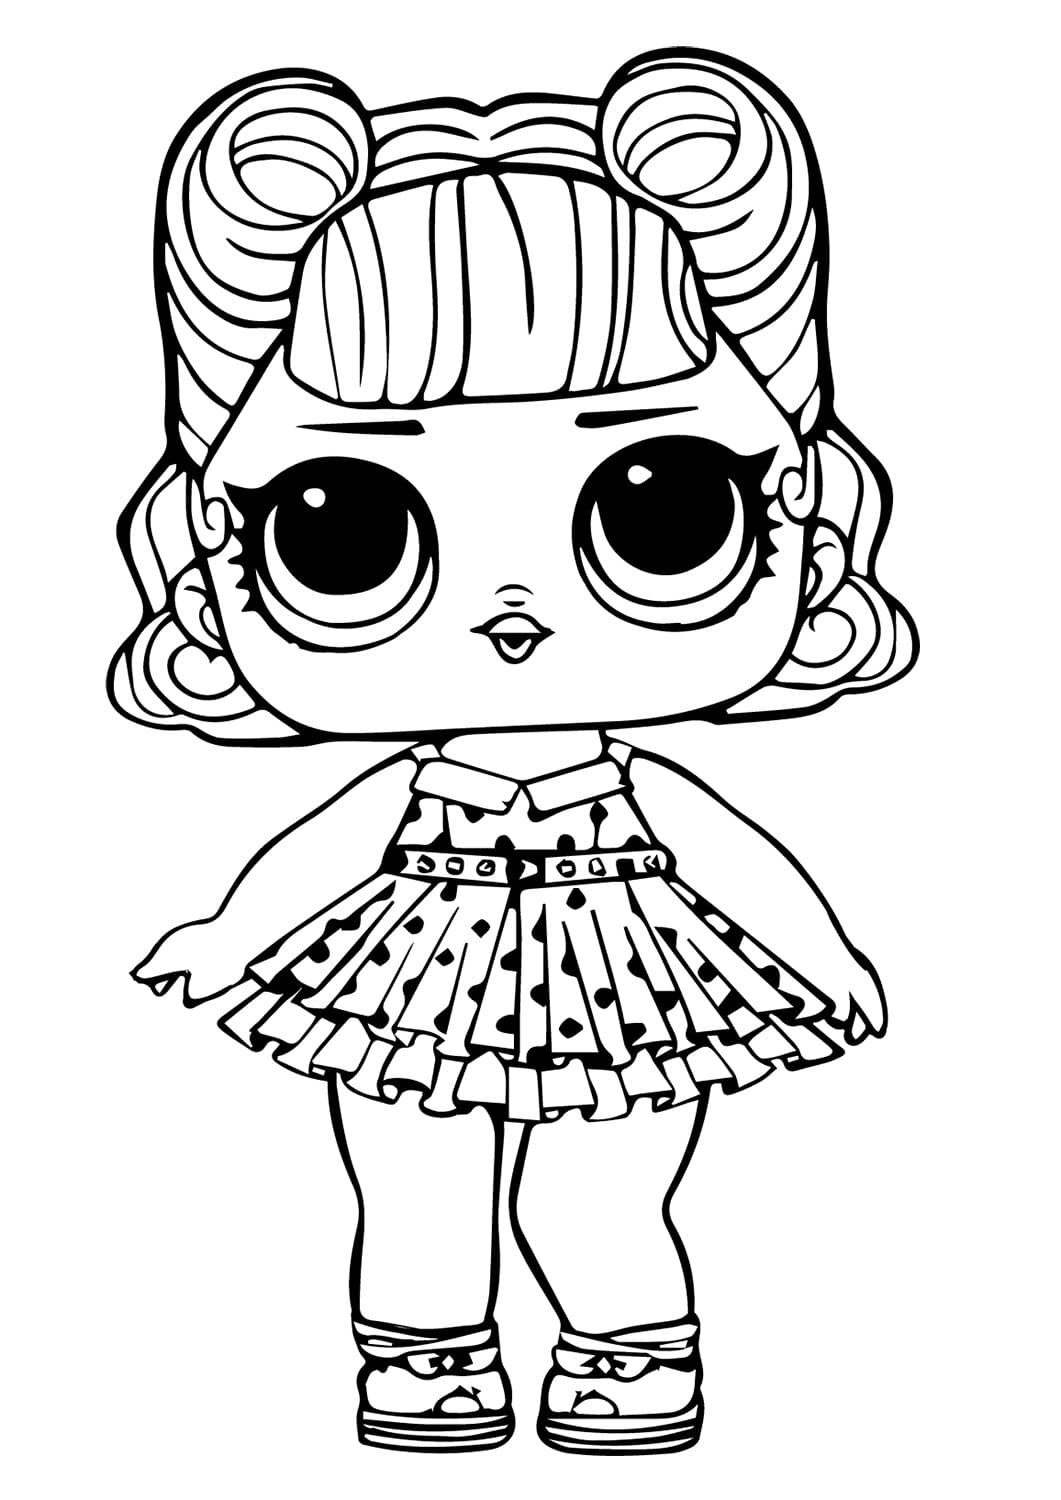 Lol Suprise Doll Jitterbug Coloring Pages - Lol Surprise Doll Coloring  Pages - Coloring Pages For Kids And Adults